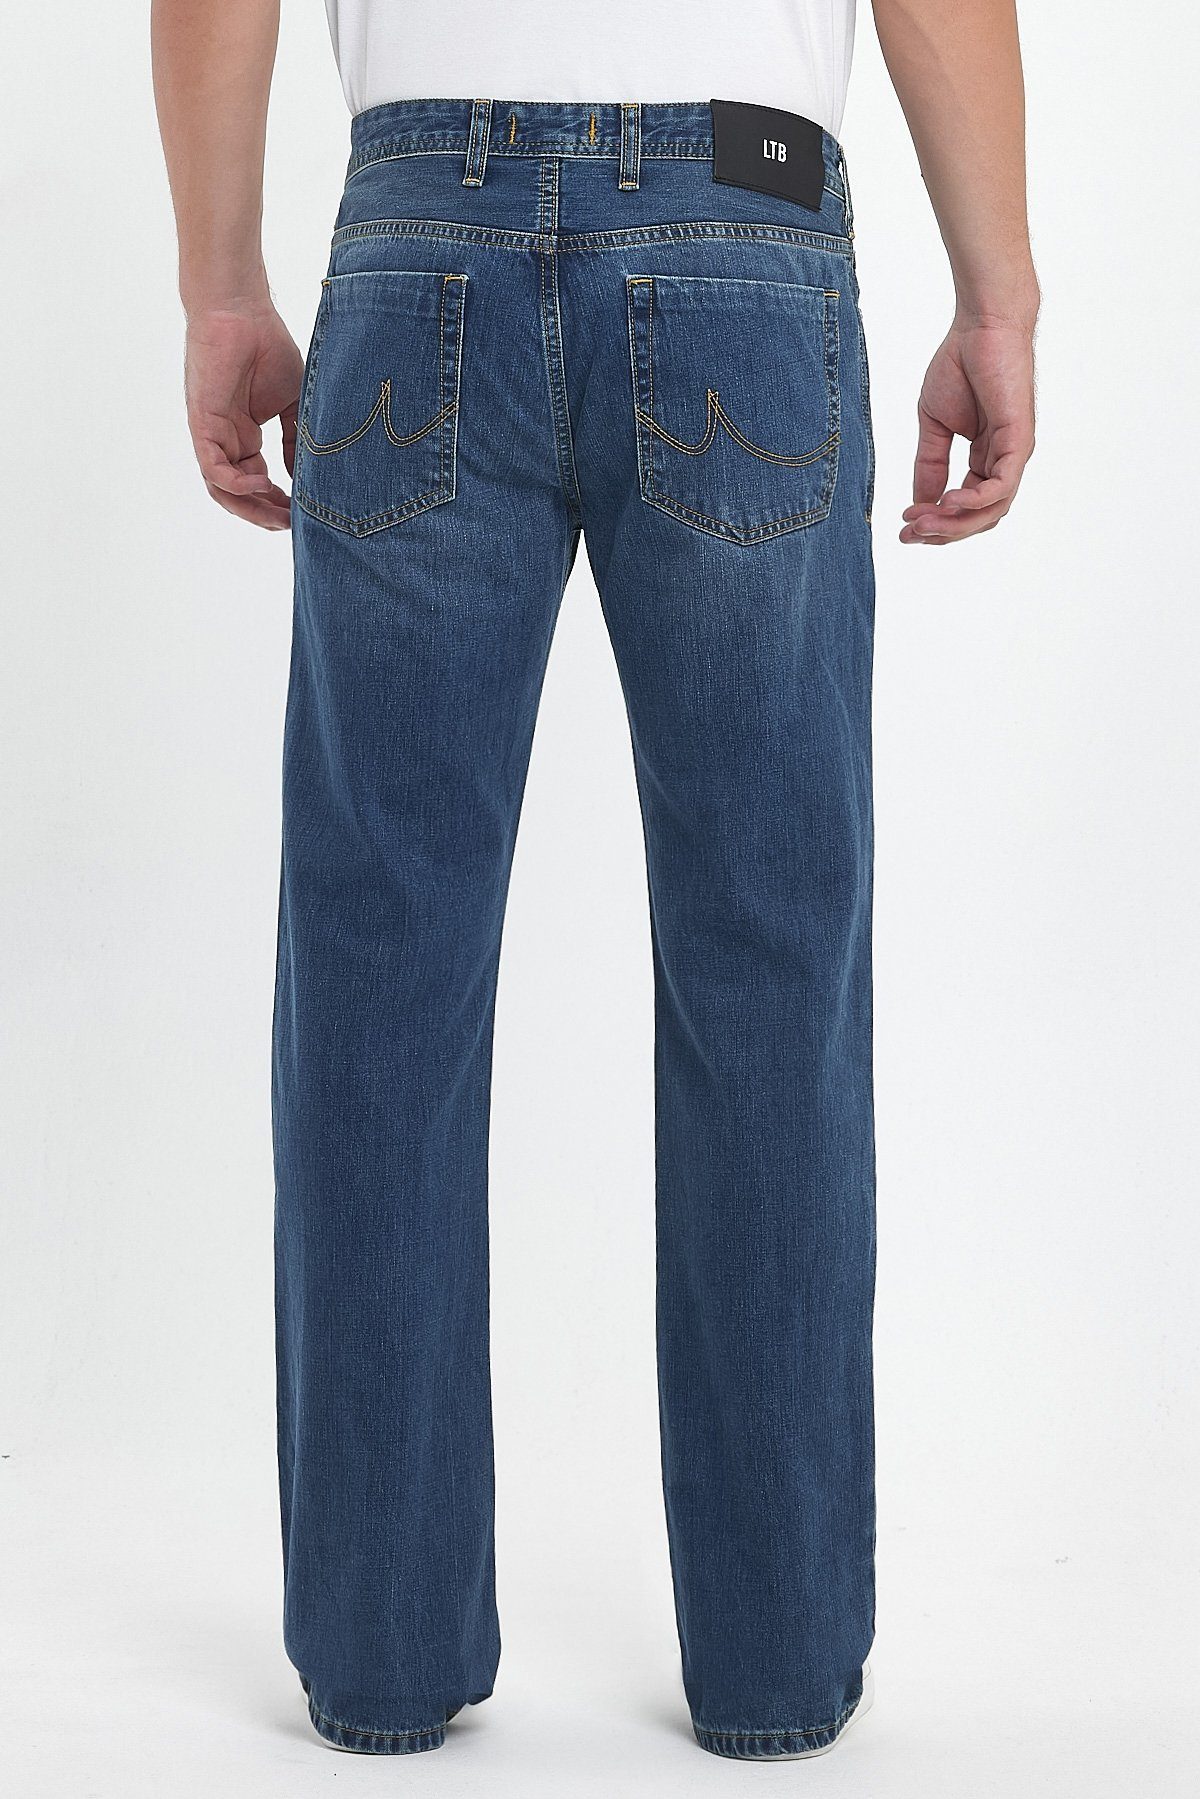 Wash LTB Giotto Bootcut-Jeans Jeans LTB Tinman